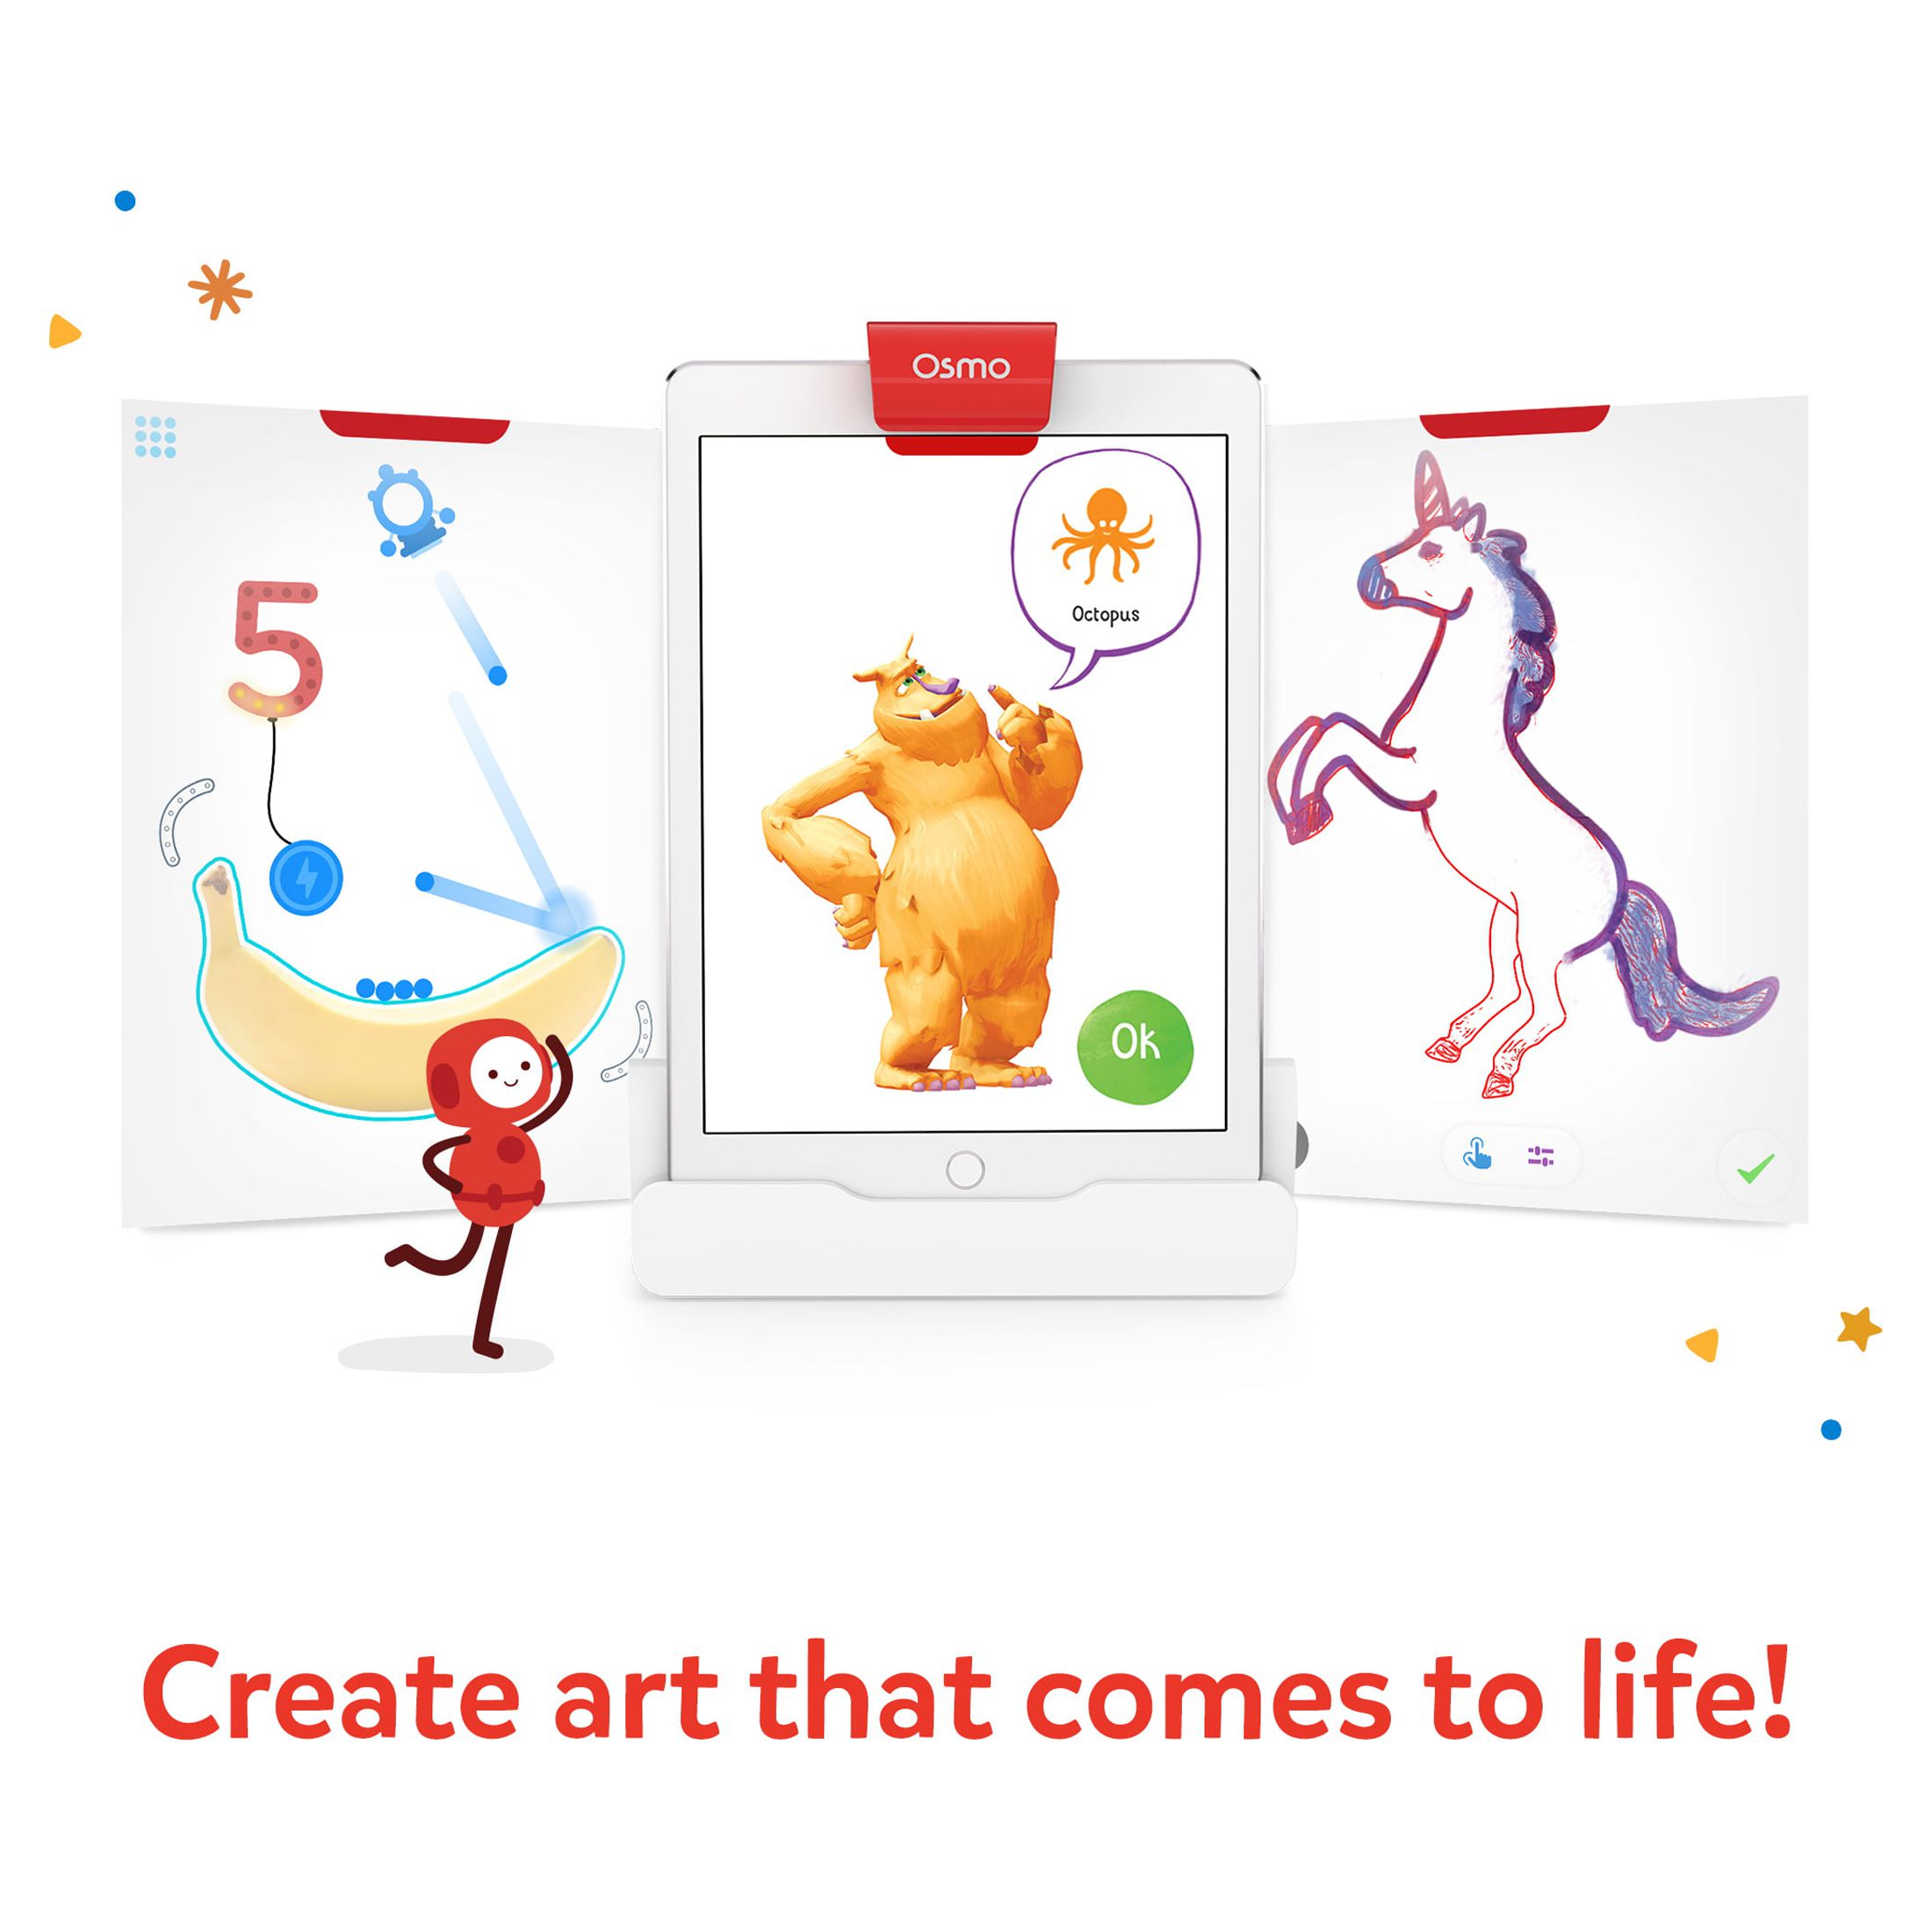 Osmo - Monster Starter Kit for iPad, Ages 5-10, 3 Educational Games, Learn Creative Drawing, Cartoon Drawing, Physics Toy, Erasable Drawing Board, Arts and Crafts, Art Sets, Kids Activities, STEM Toys - image 5 of 8